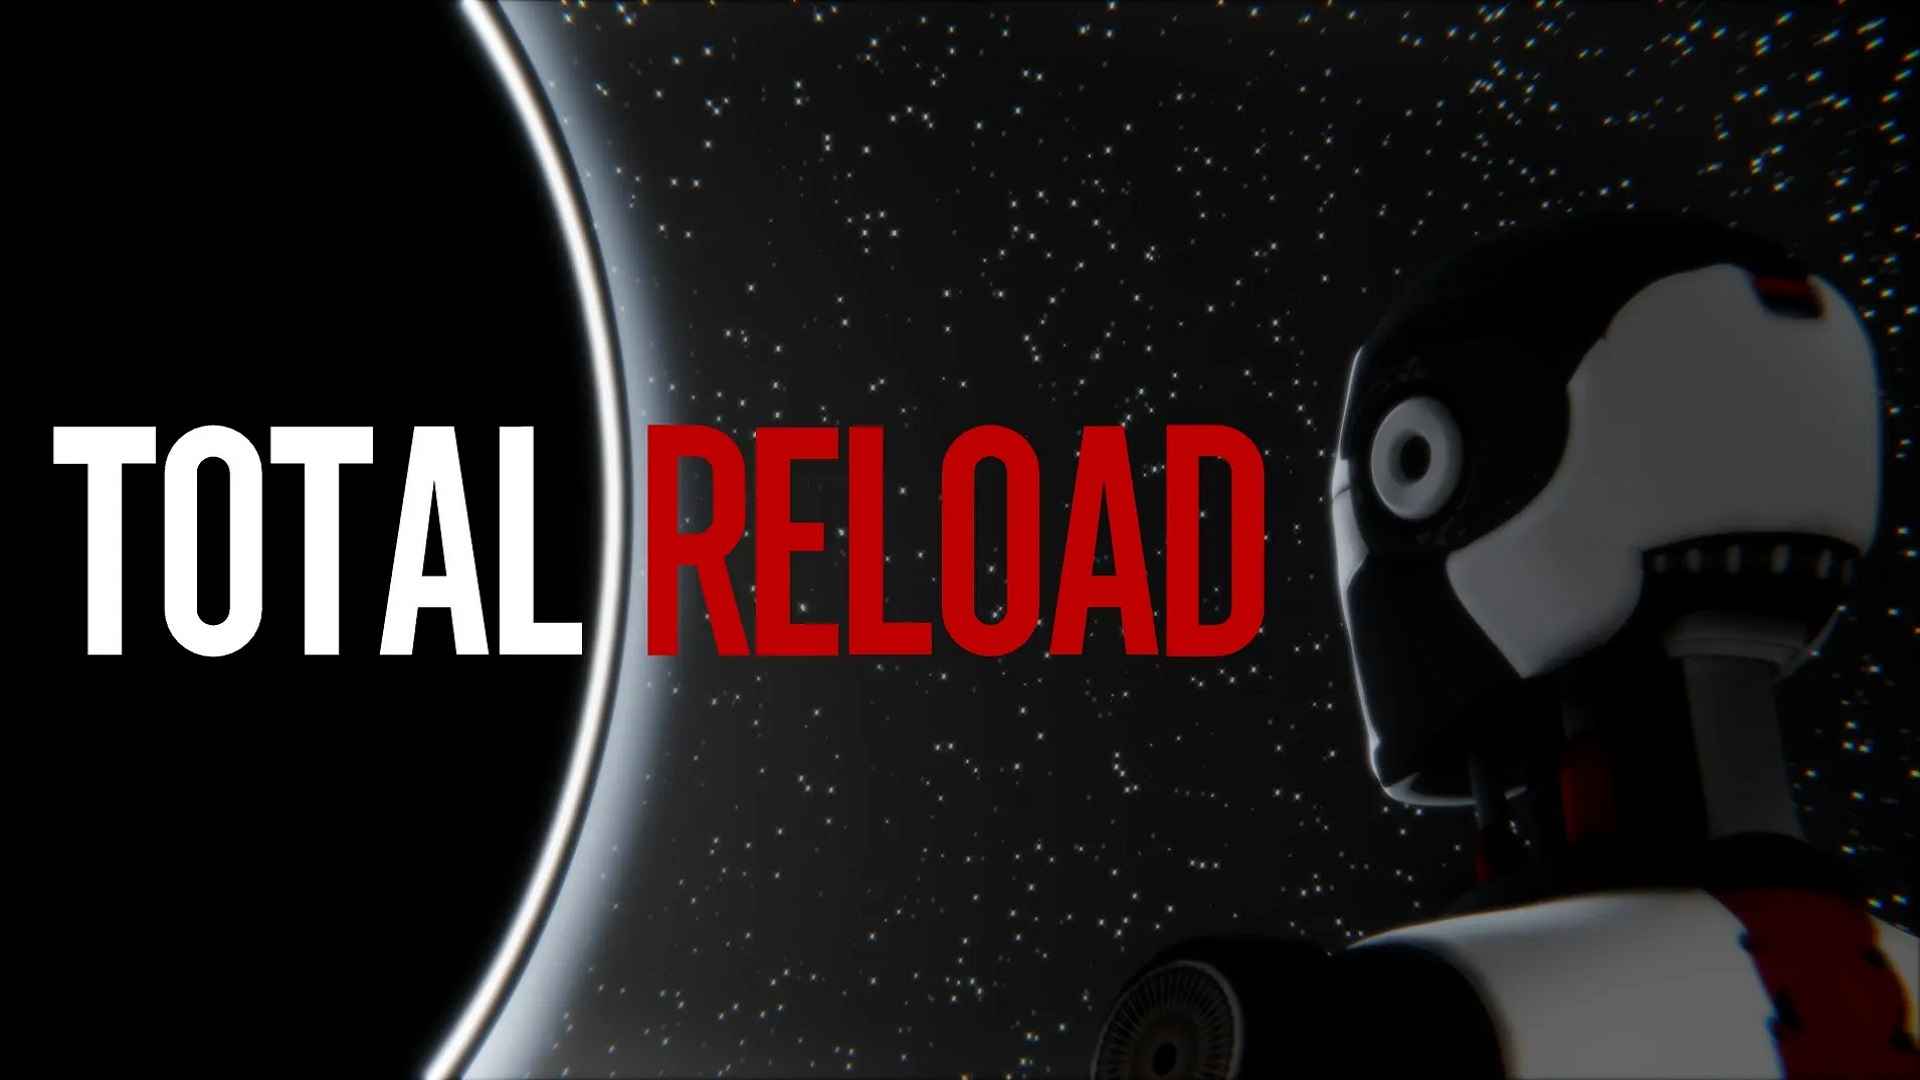 Total Reload Gets Puzzling In New Gameplay Trailer